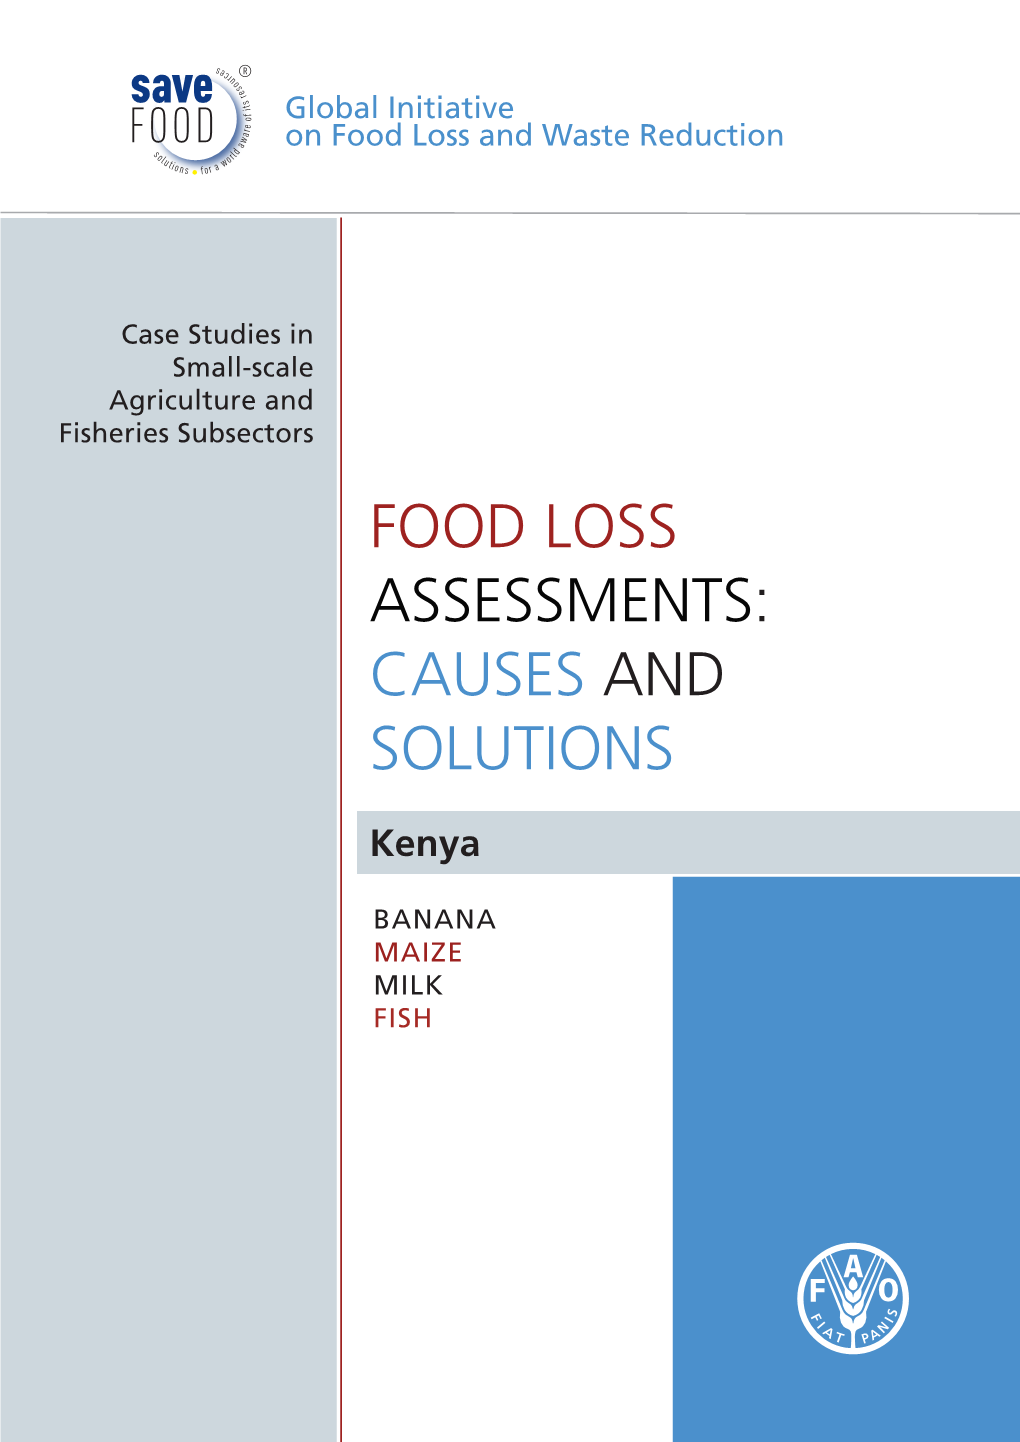 Kenya Food Loss Assessments: Causes and Solutions for Banana, Maize